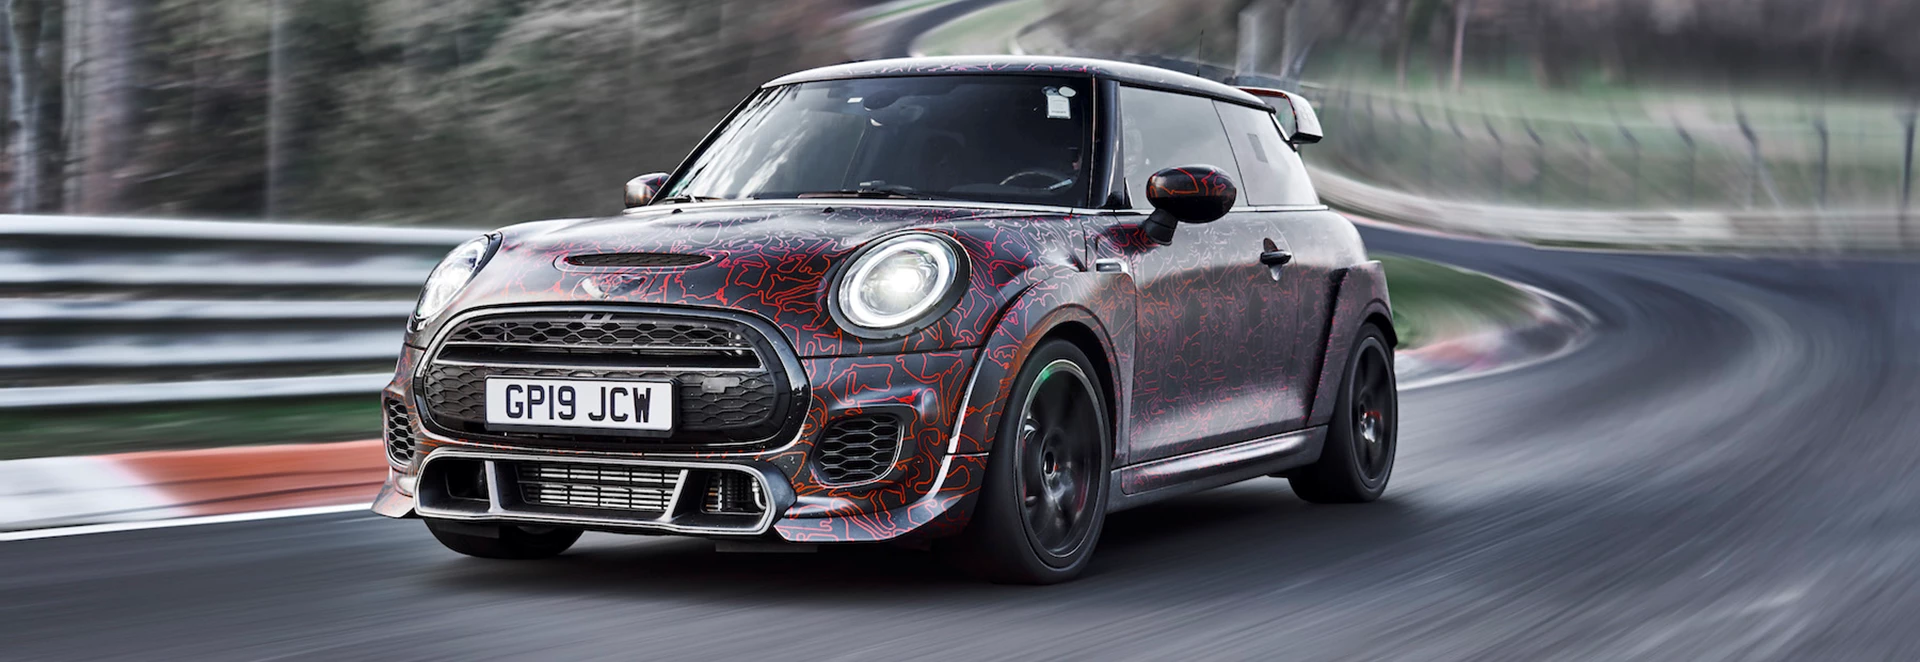 2020 Mini JCW GP: What we know about the hottest Mini so far